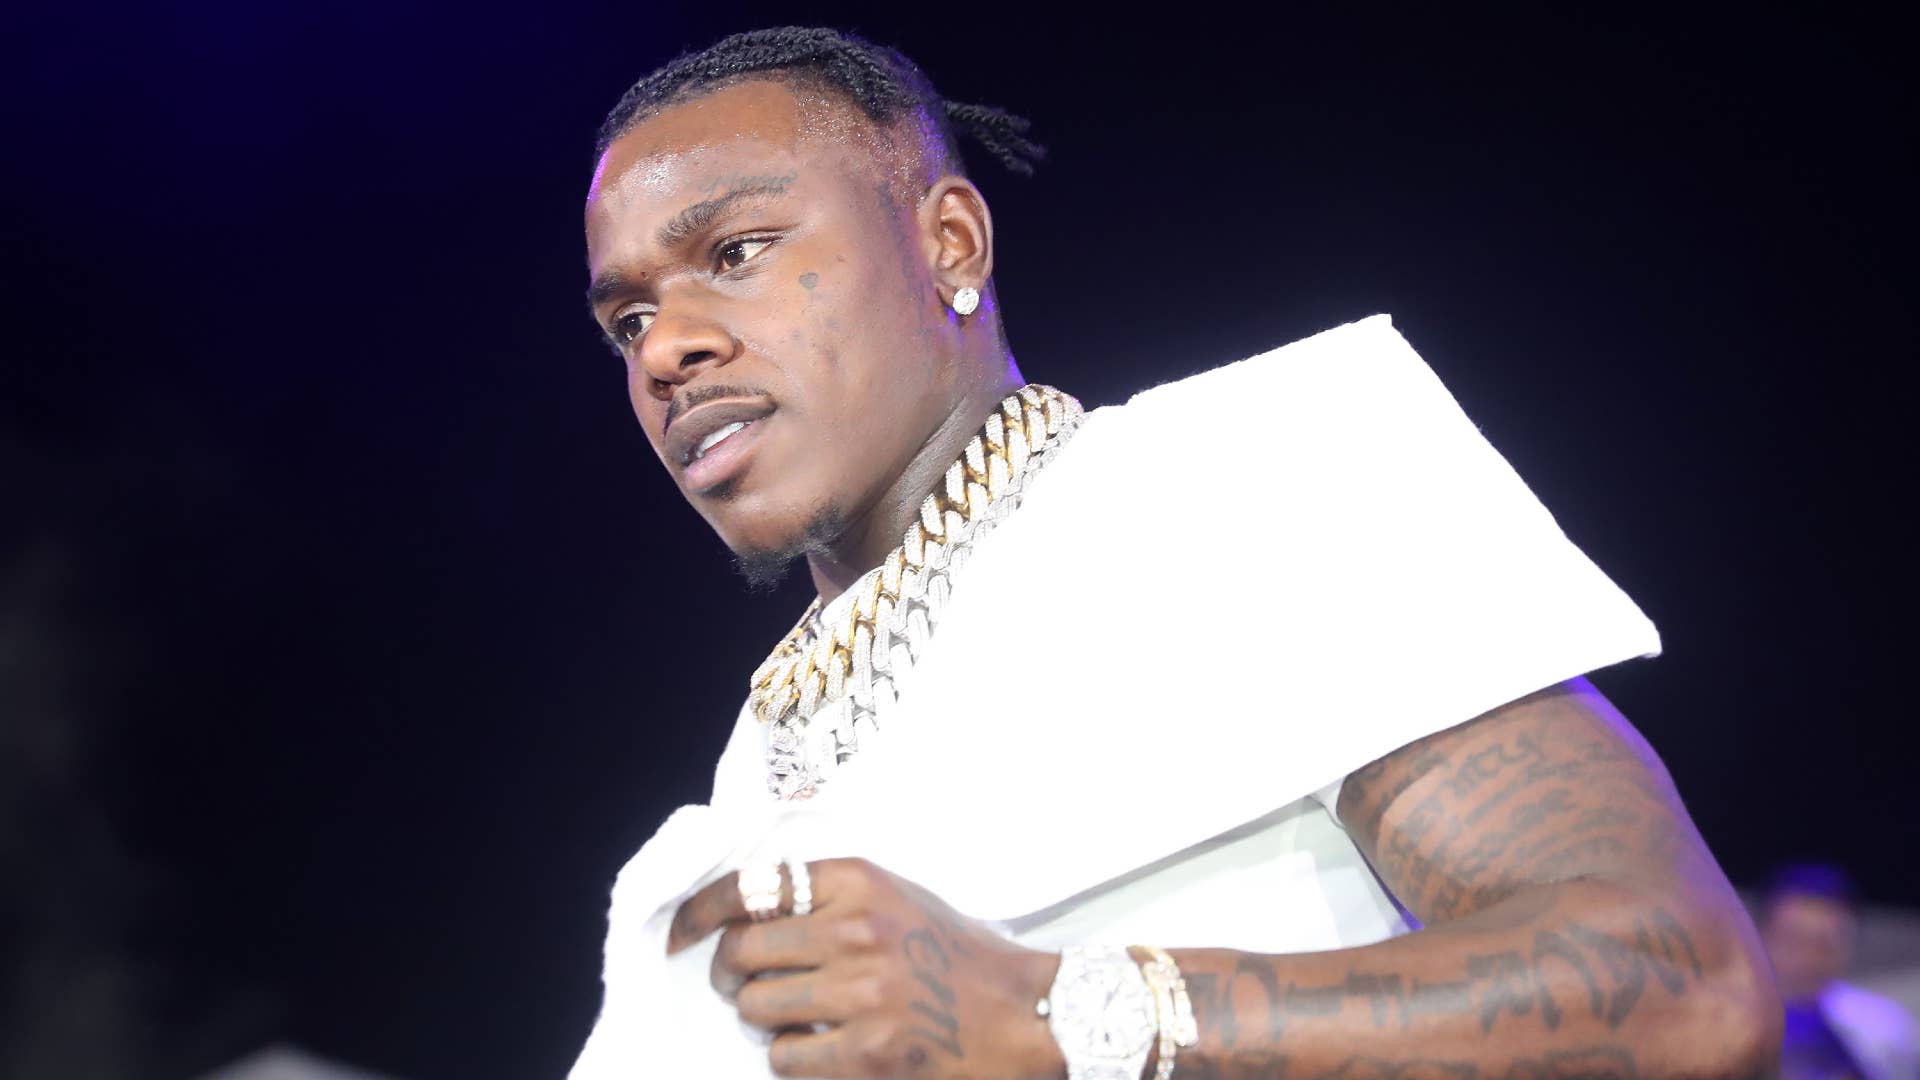 DaBaby is pictured performing at an event